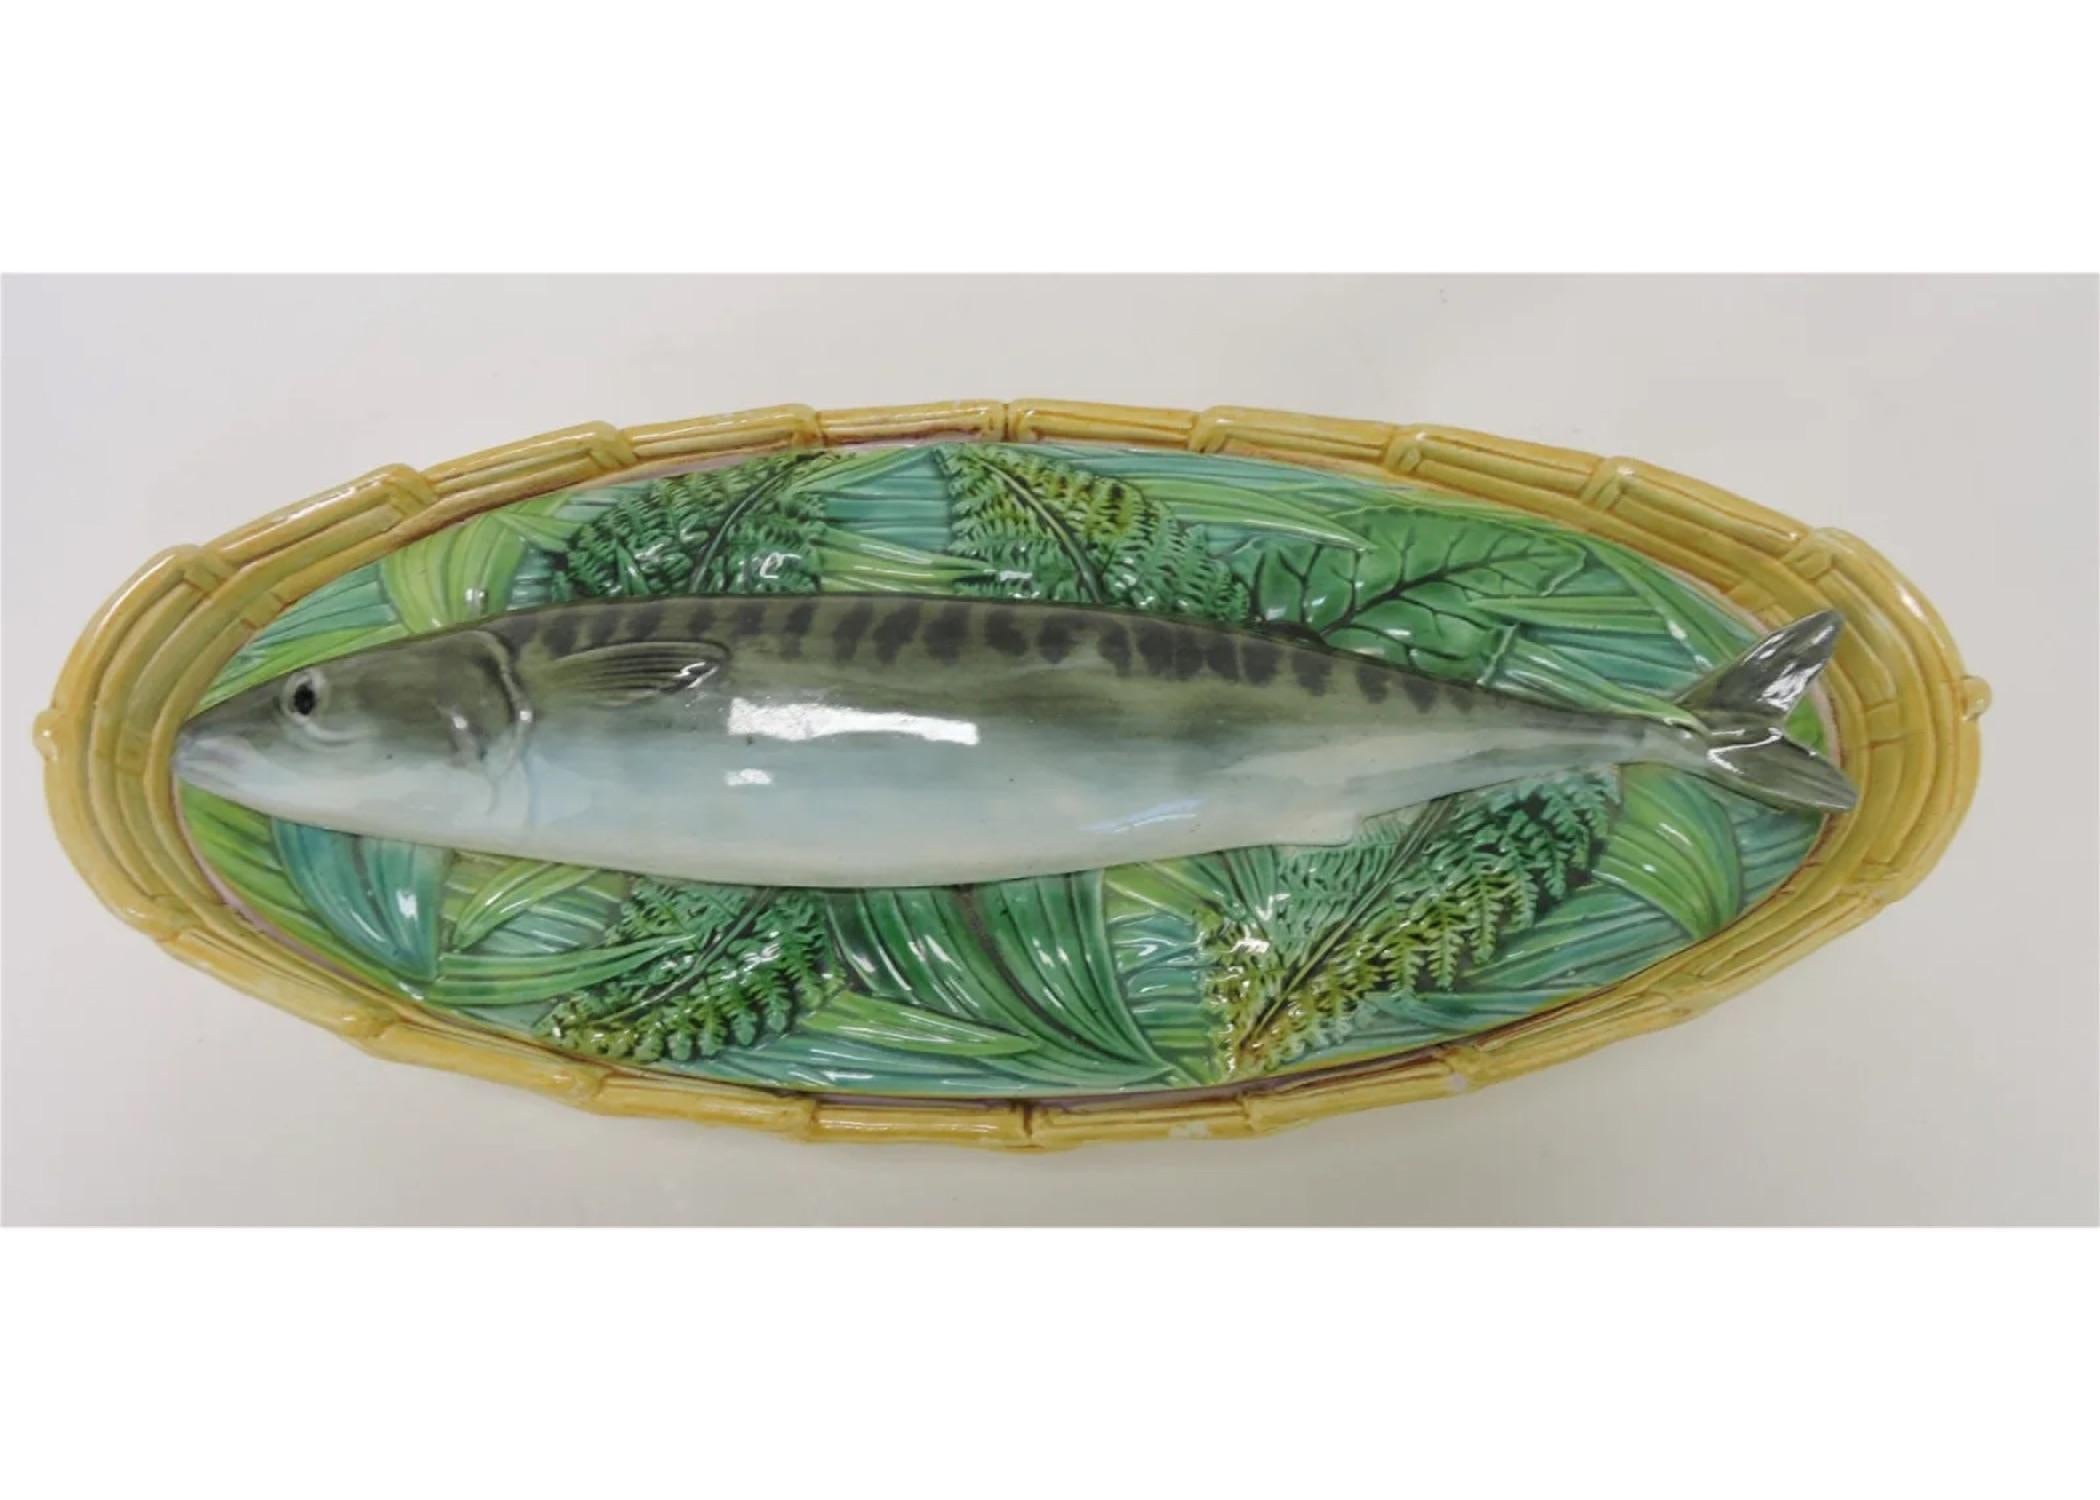 George Jones Majolica Tureen with Wicker Base In Excellent Condition For Sale In Dallas, TX